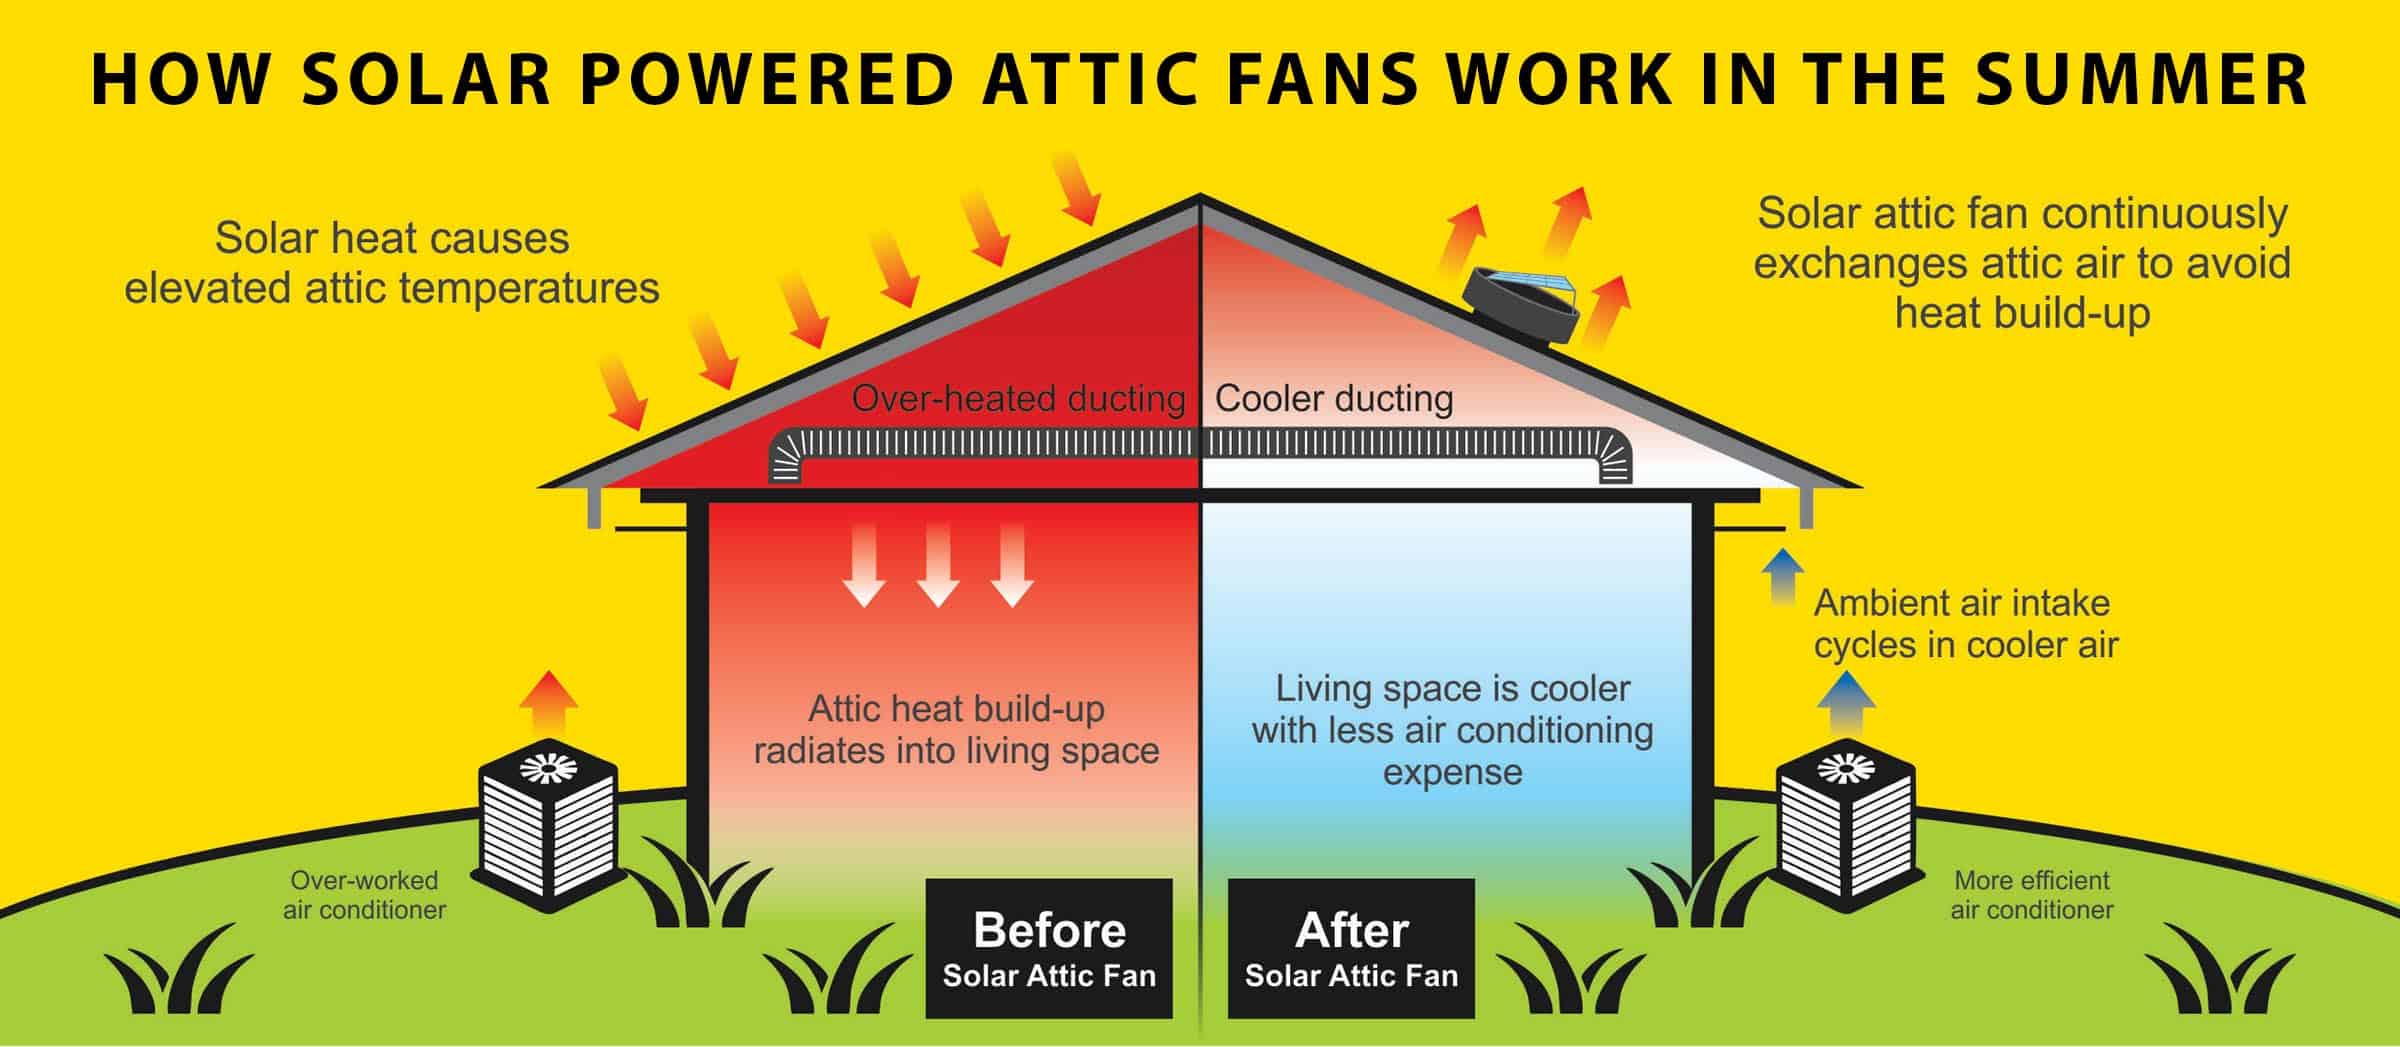 HOW SOLAR POWERED ATTIC FANS WORK IN THE SUMMER